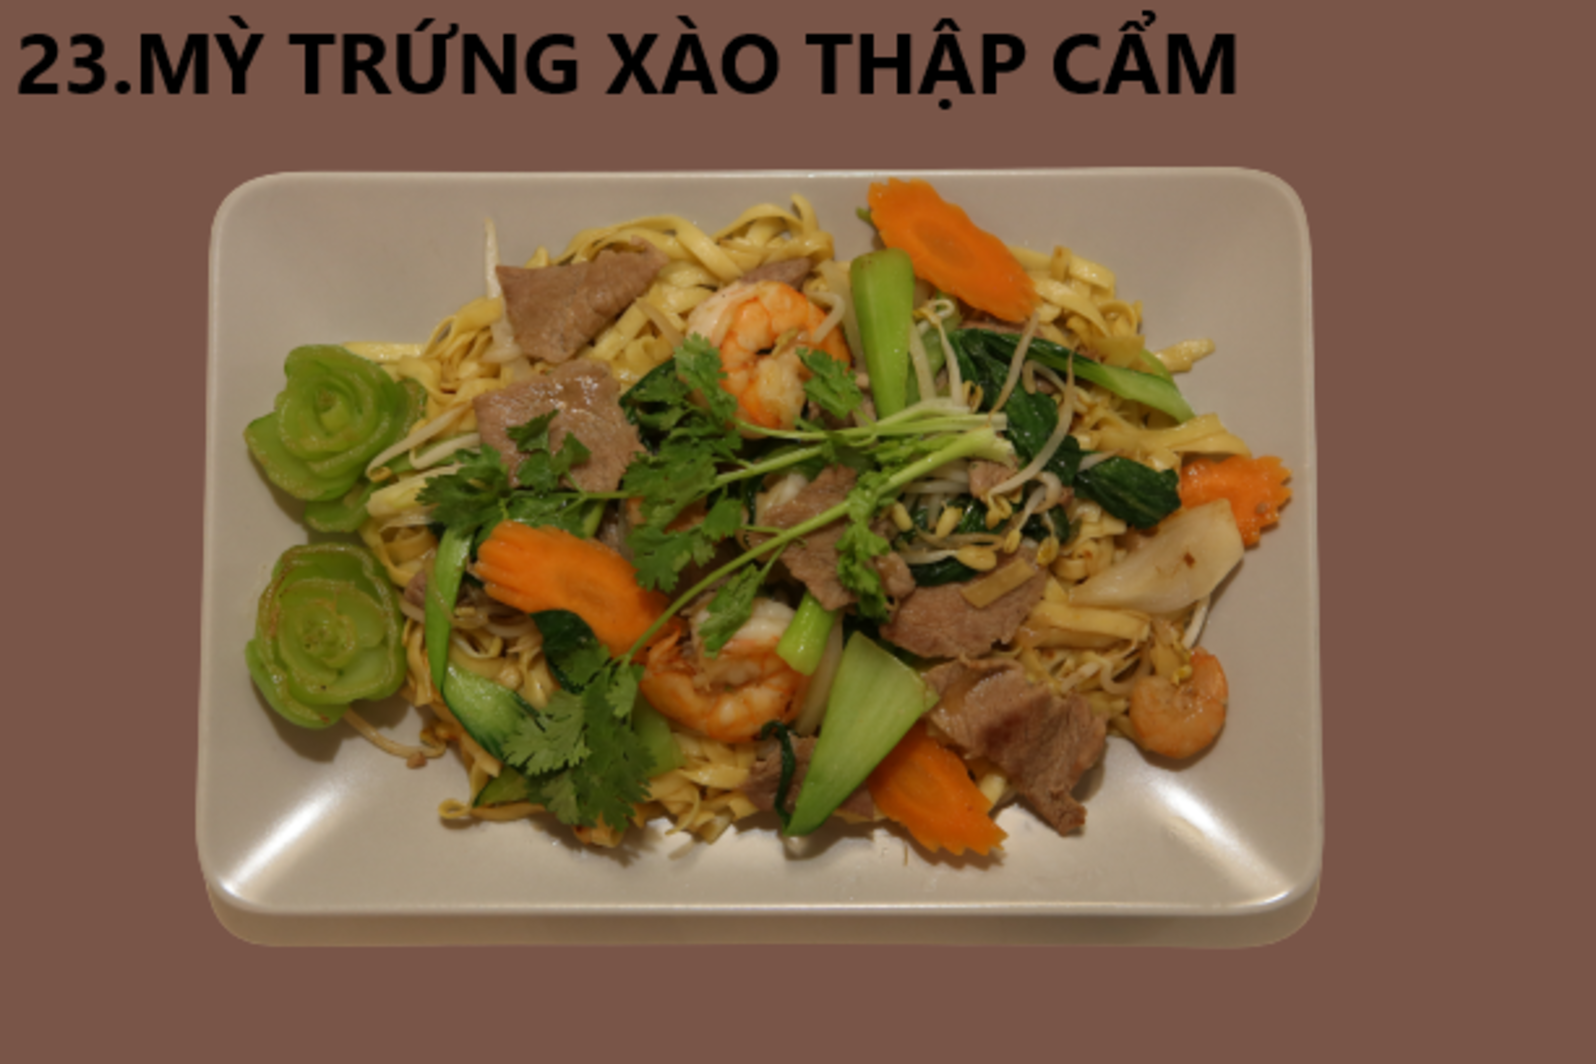 23.-MY-TRUNG-XAO-THAP-CAM